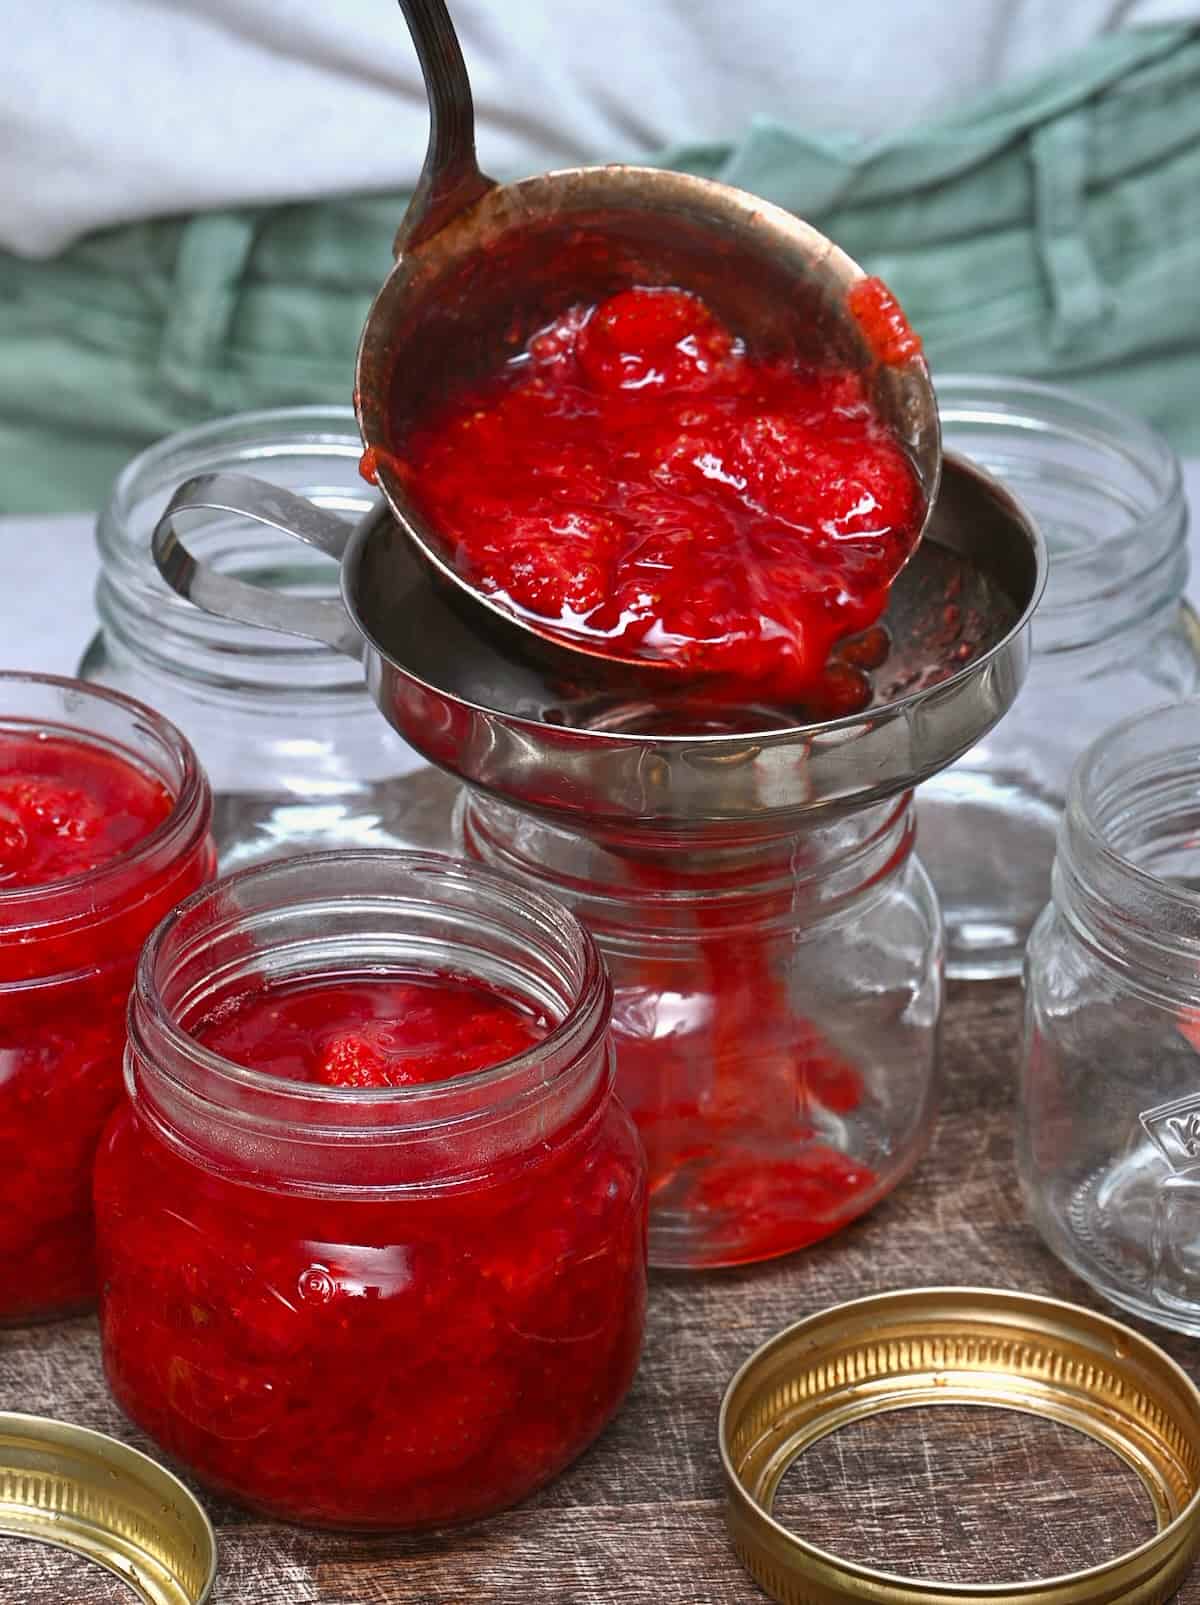 Filling jars with homemade strawberry jam